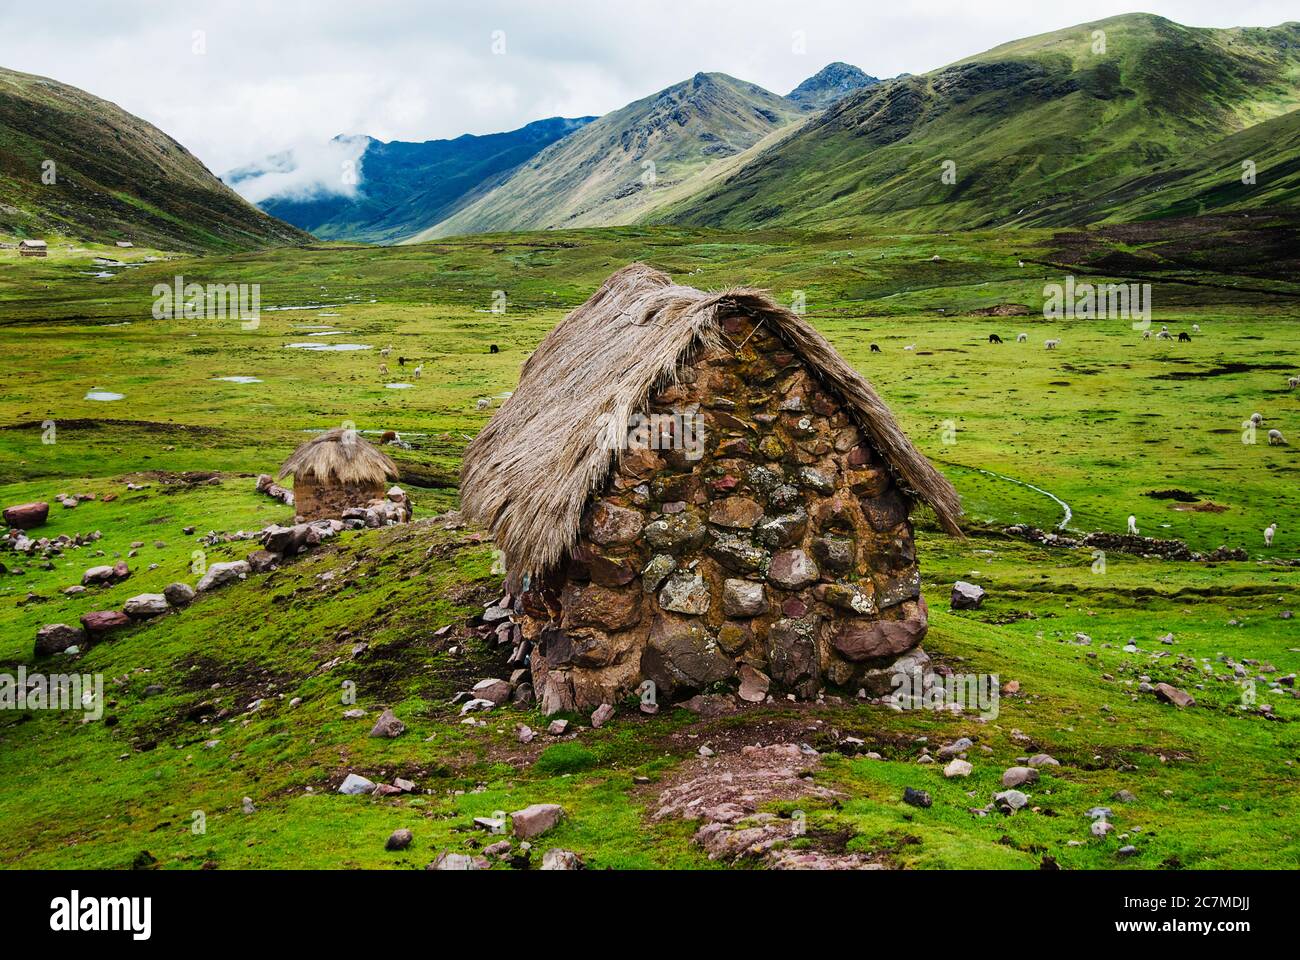 Stone hut in Chaullacocha village, Andes Mountains, Peru, South America Stock Photo